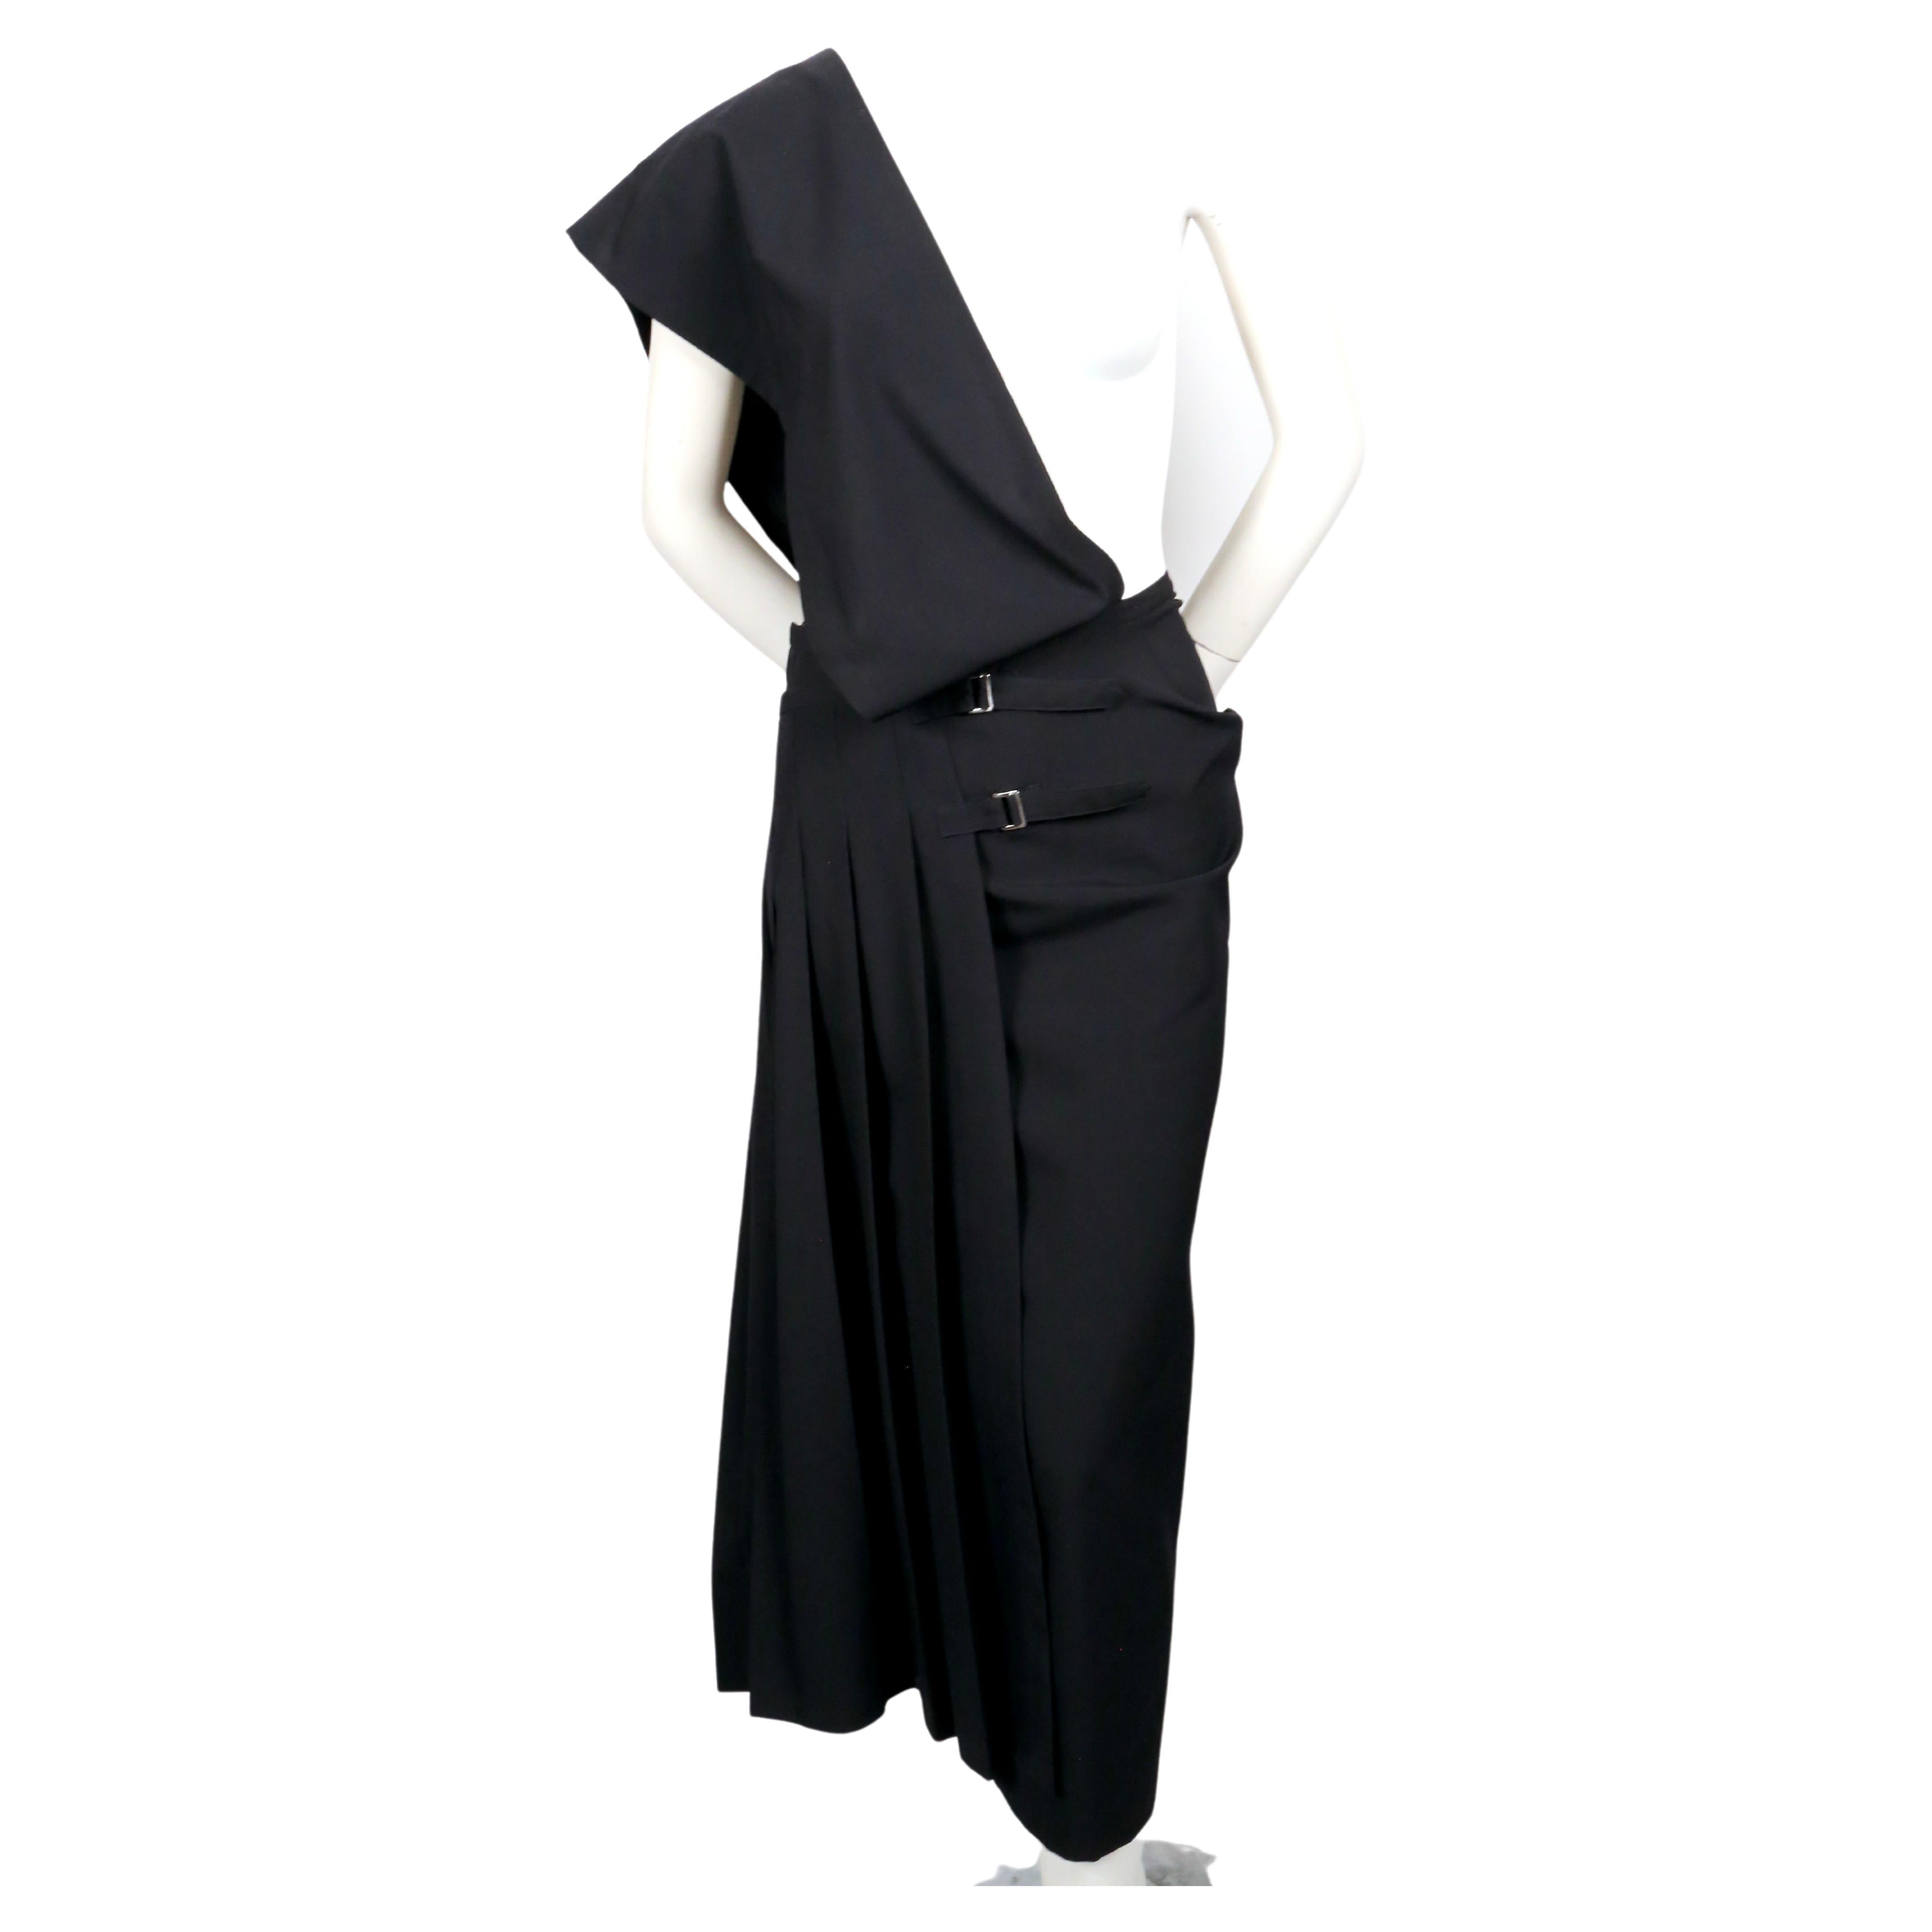 Black, asymmetrical one shoulder dress with wrap around pleated skirt designed by Rei Kawakubo for Comme Des Garcons dating to 1989. Size 'M'. Approximate measurement at interior of waist 28